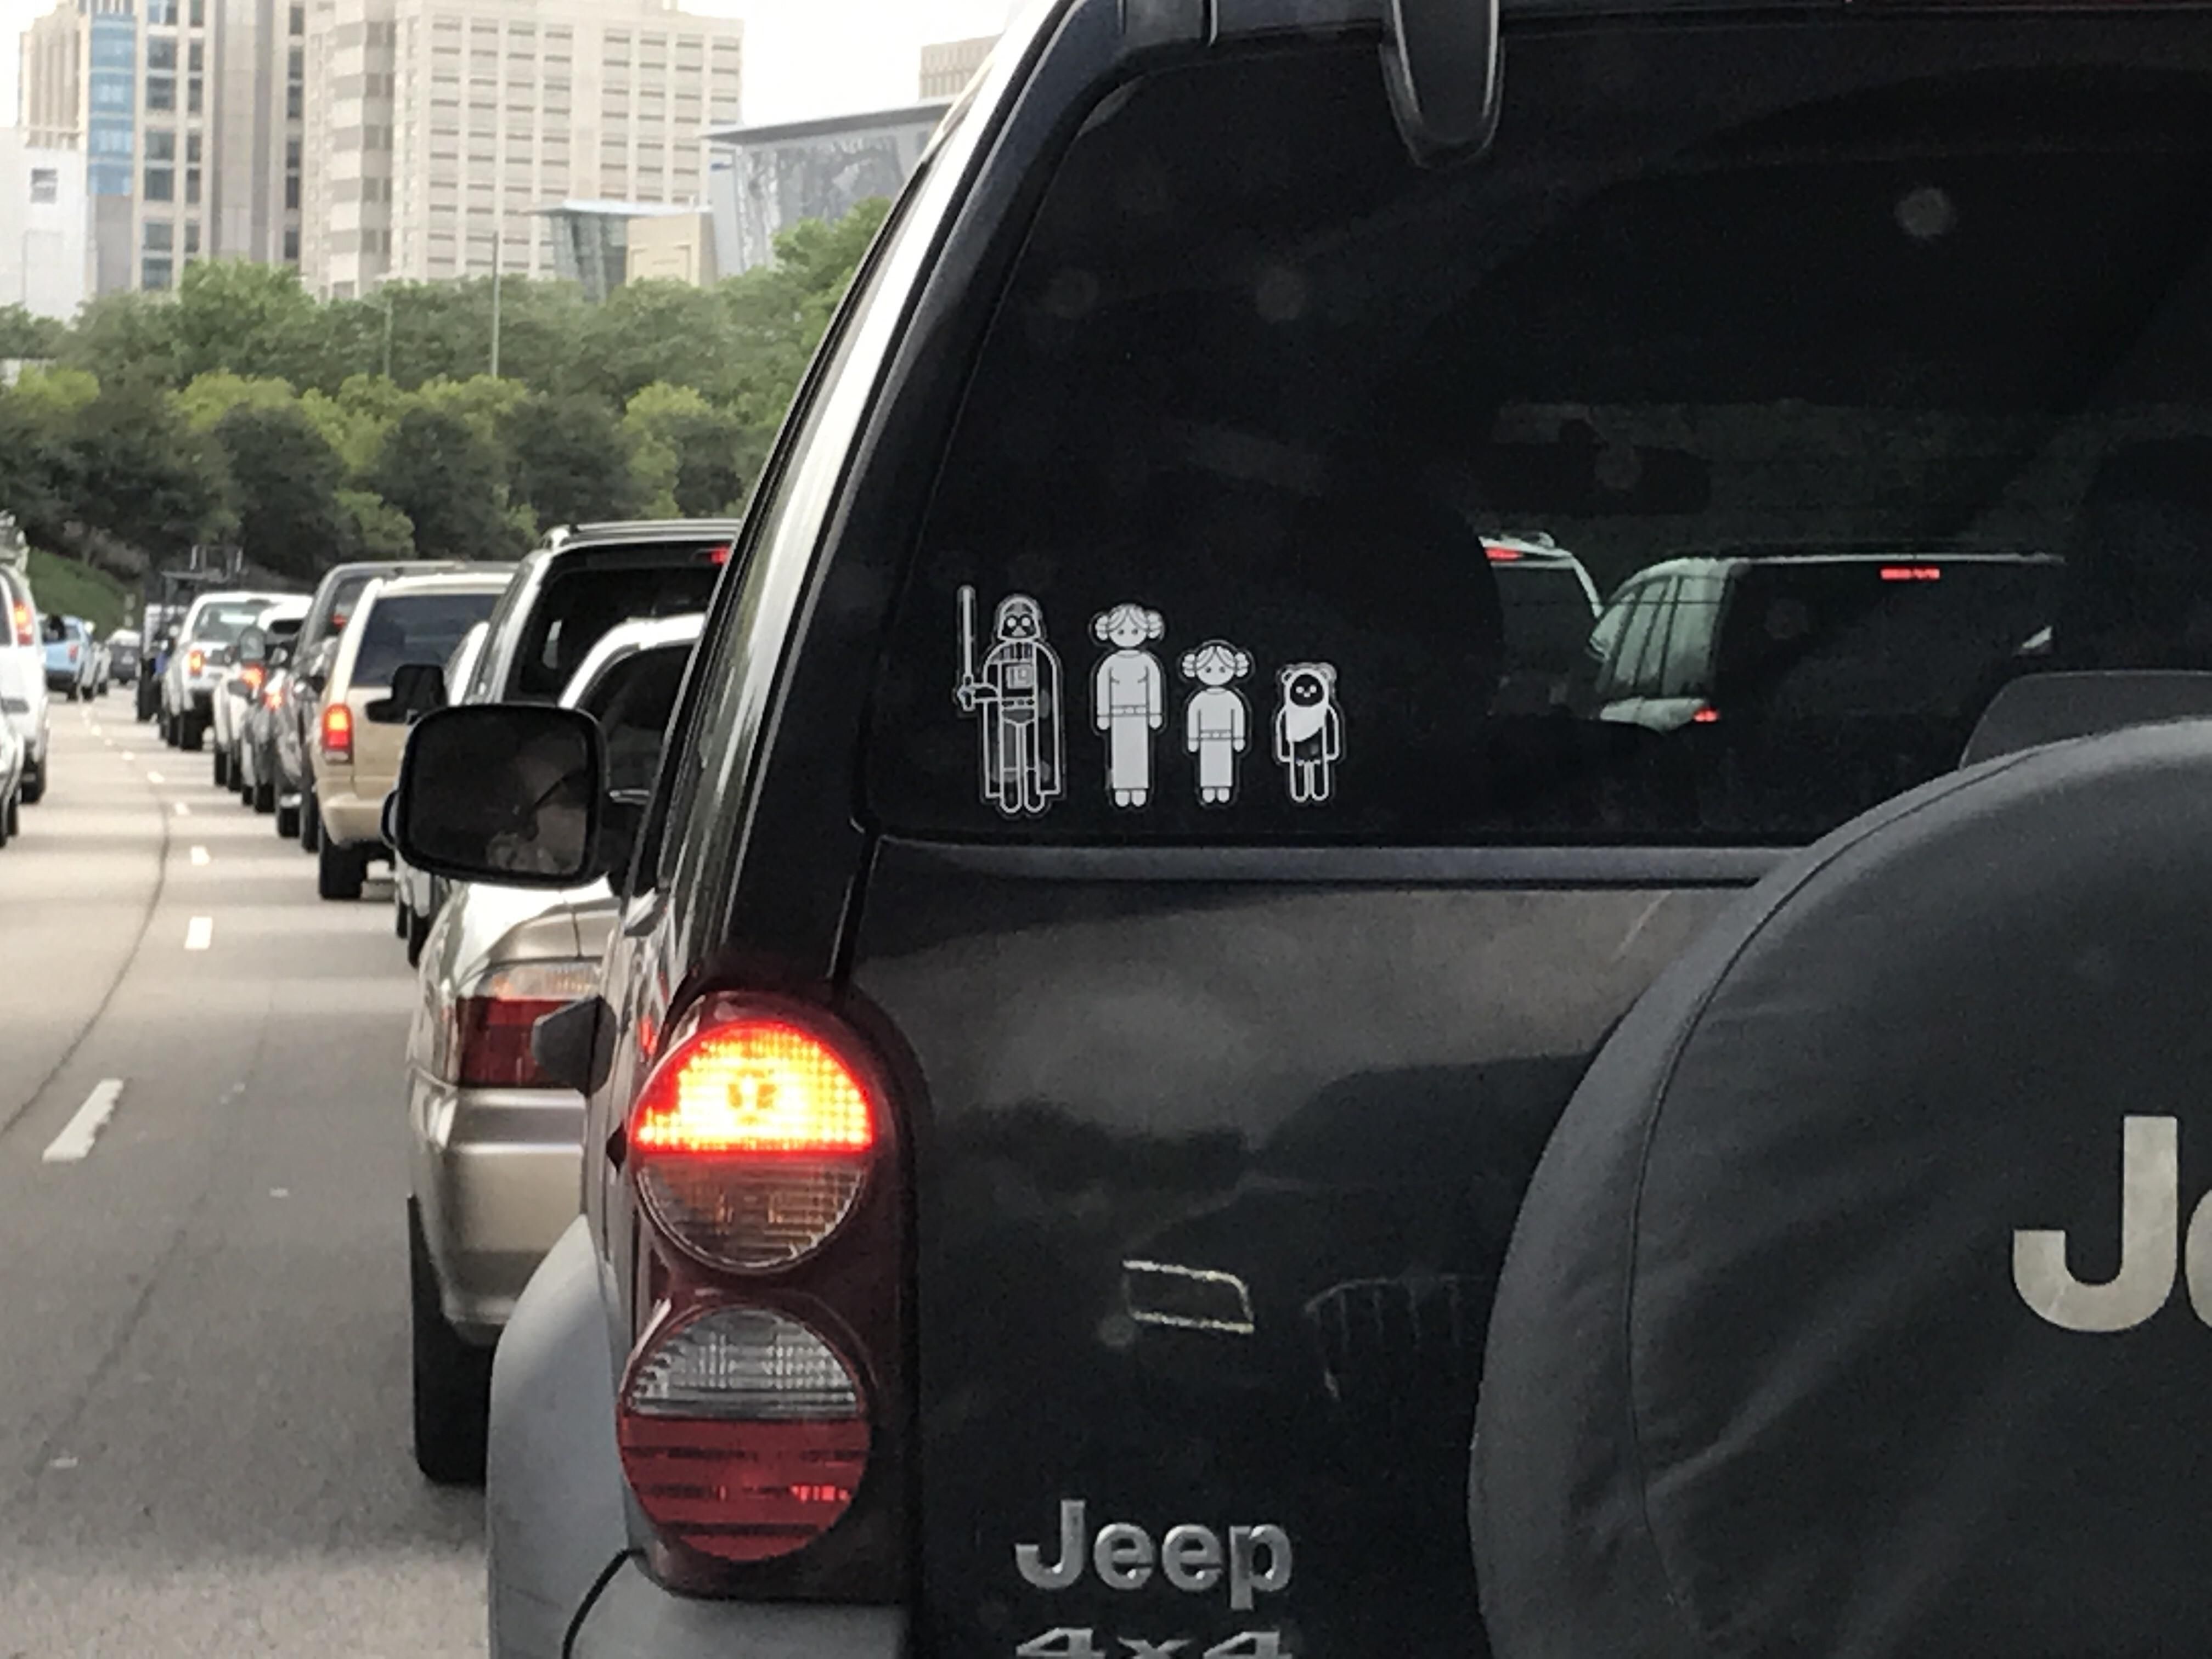 I don't think this person fully understands the relationship between Vader and Leia